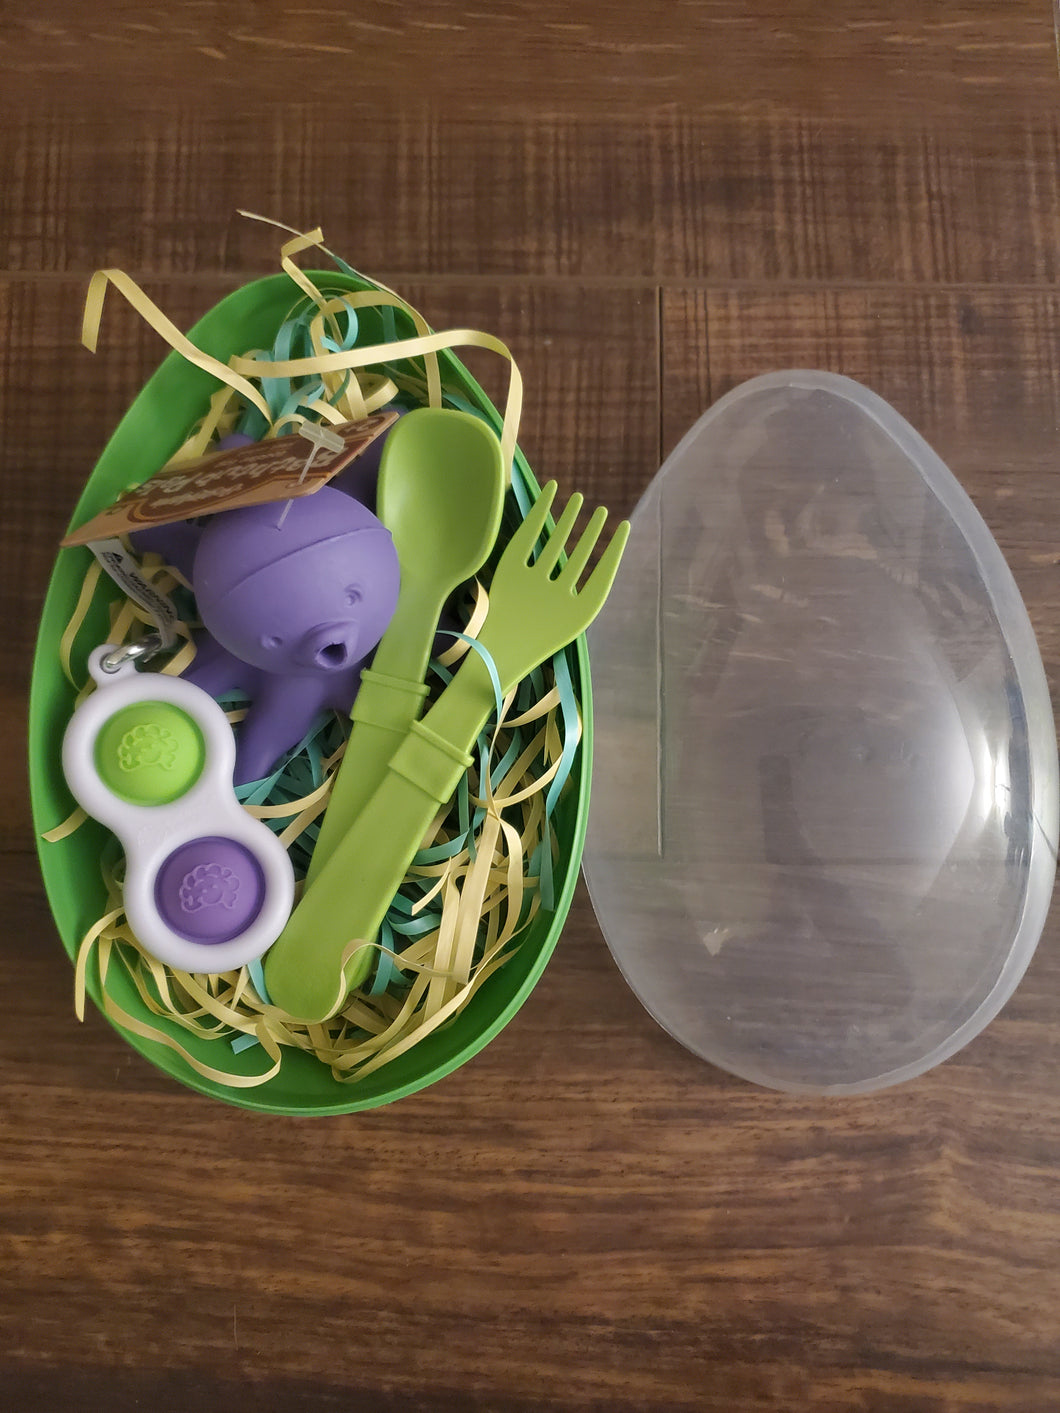 Easter Egg Green With Octopus, Fork And Spoon, and Key Chain